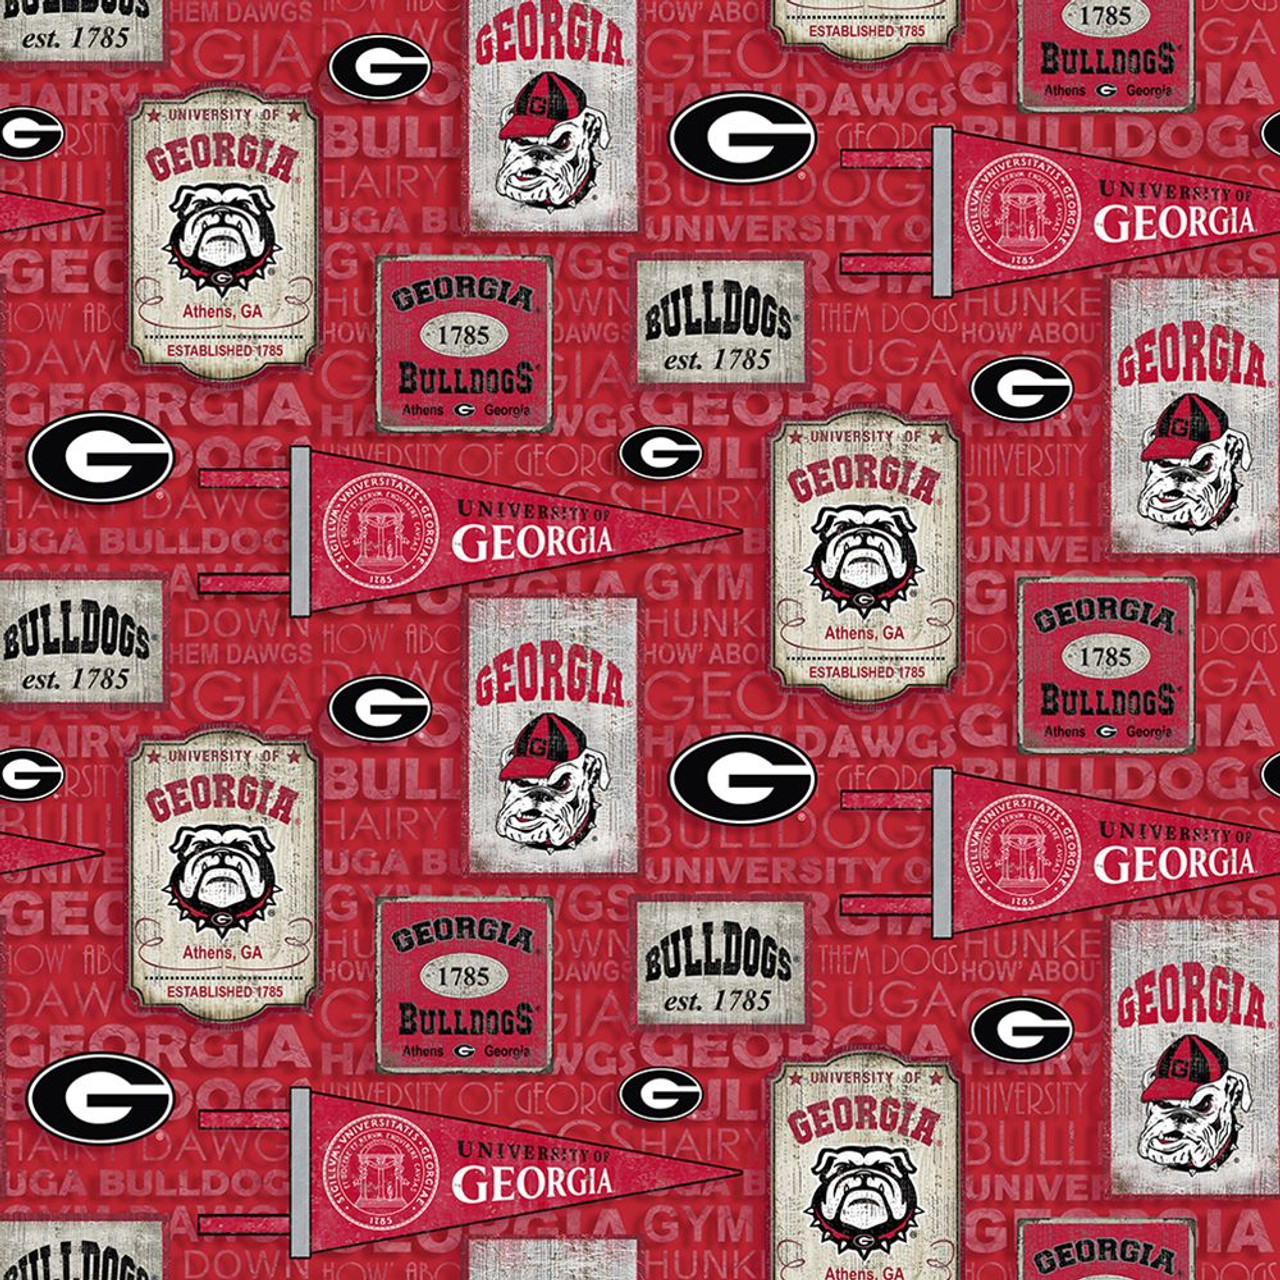 University of Georgia Bulldogs Cotton Fabric with Vintage Pennant Print or Matching Solid Cotton Fabrics